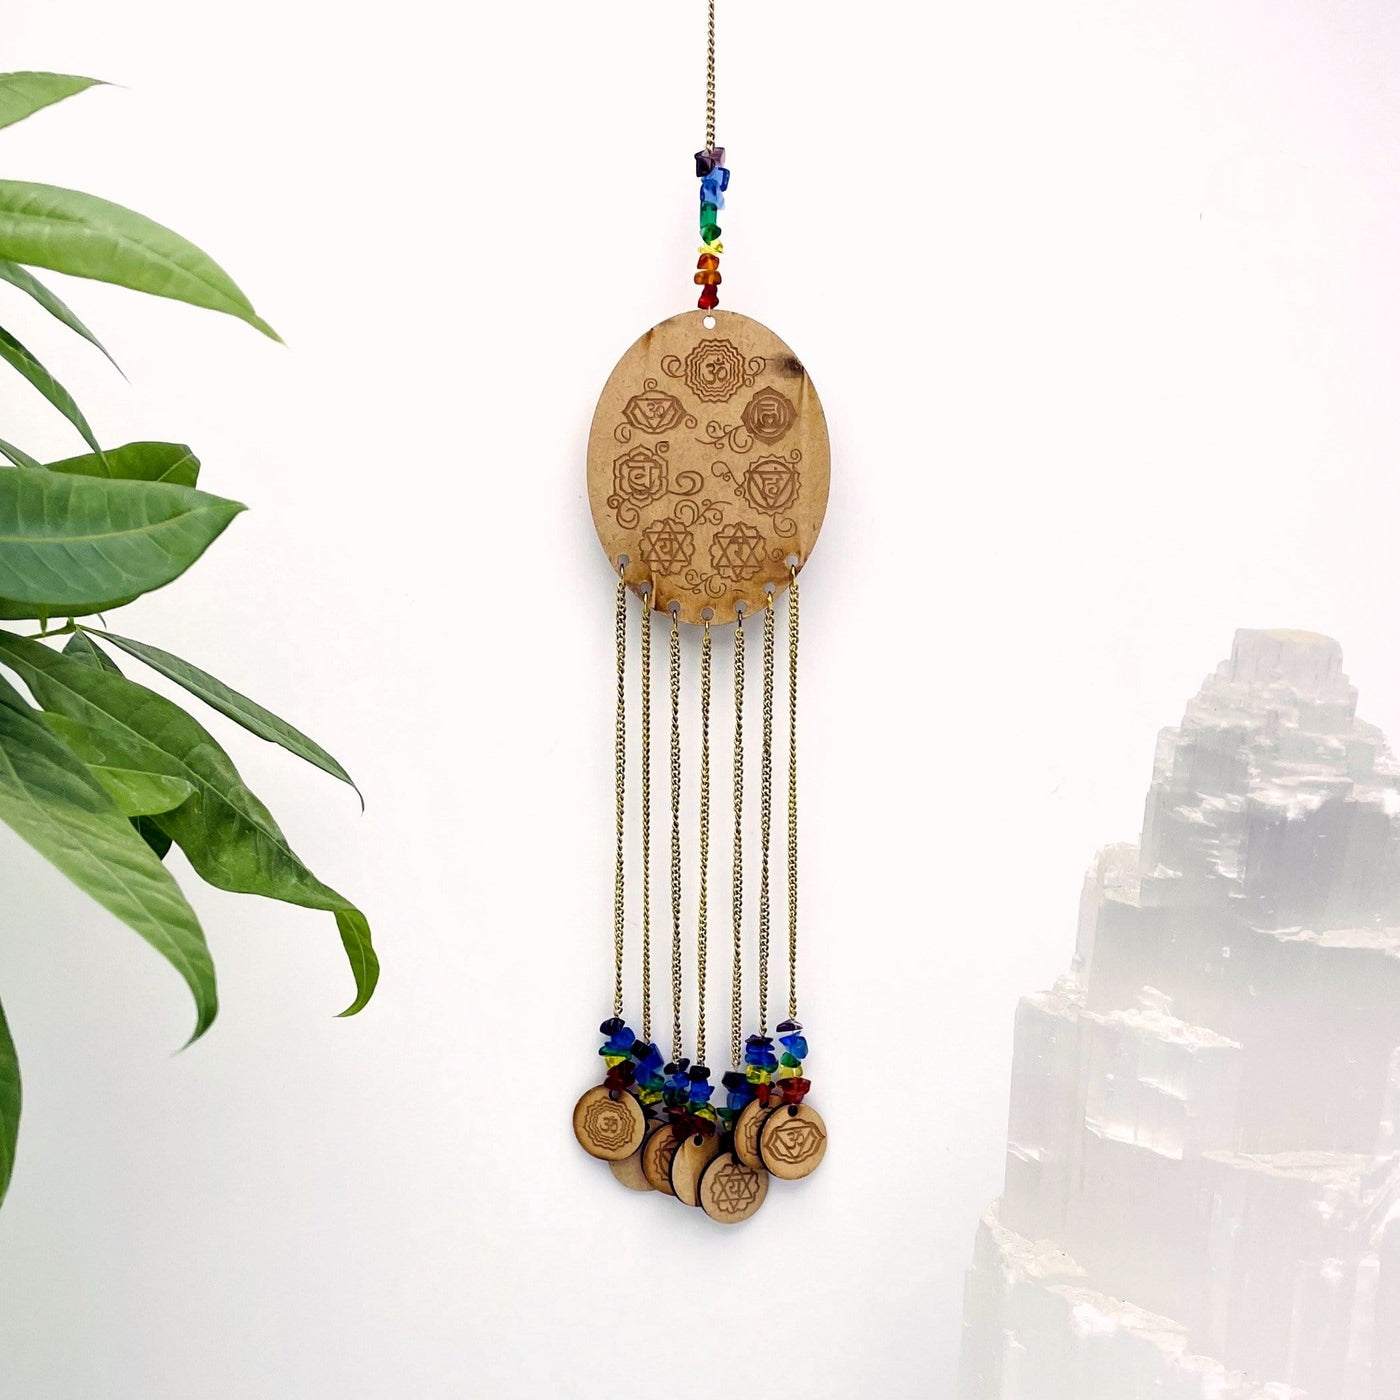 Engraved Wooden 7 Chakras hanged on white background.